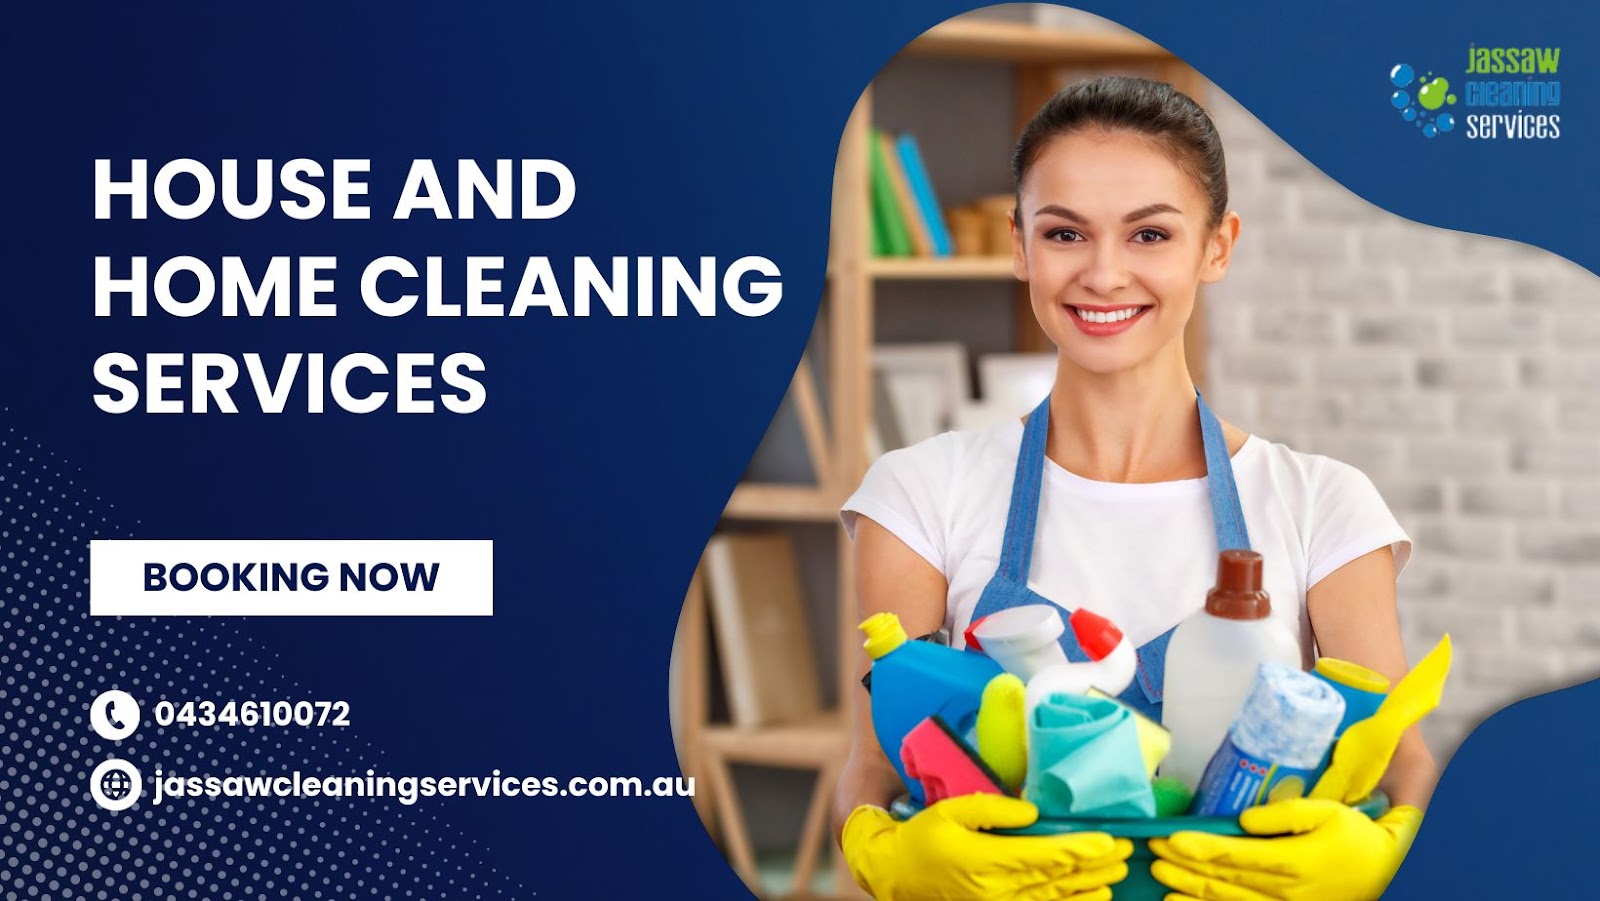 Expert House and Home Cleaning Services in Canberra and Queanbeyan